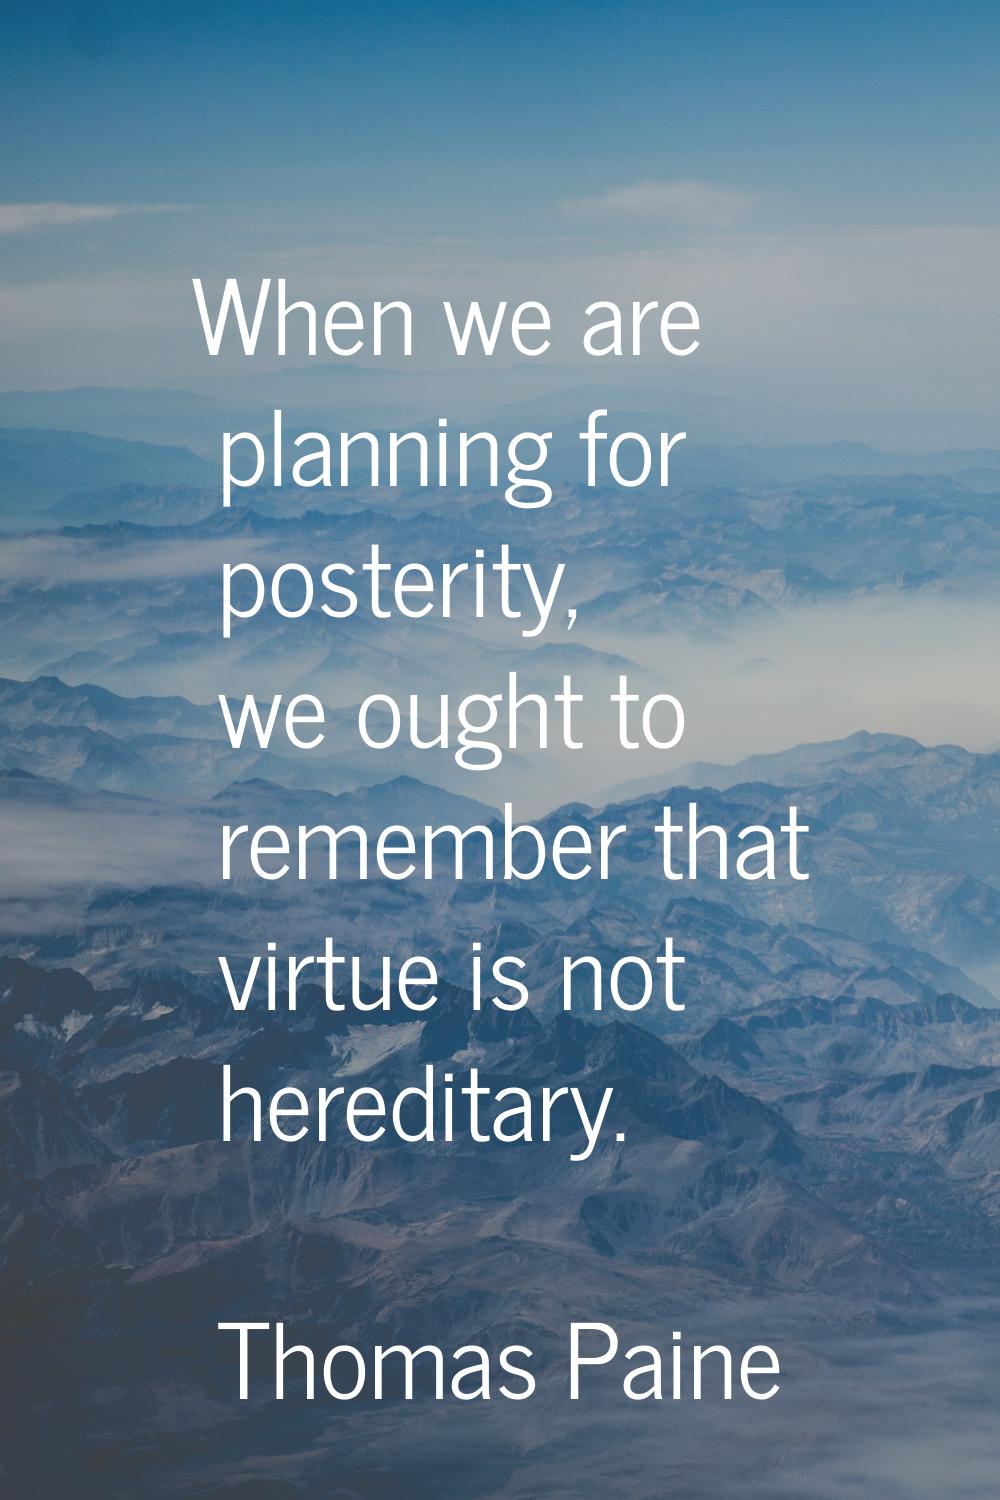 When we are planning for posterity, we ought to remember that virtue is not hereditary.